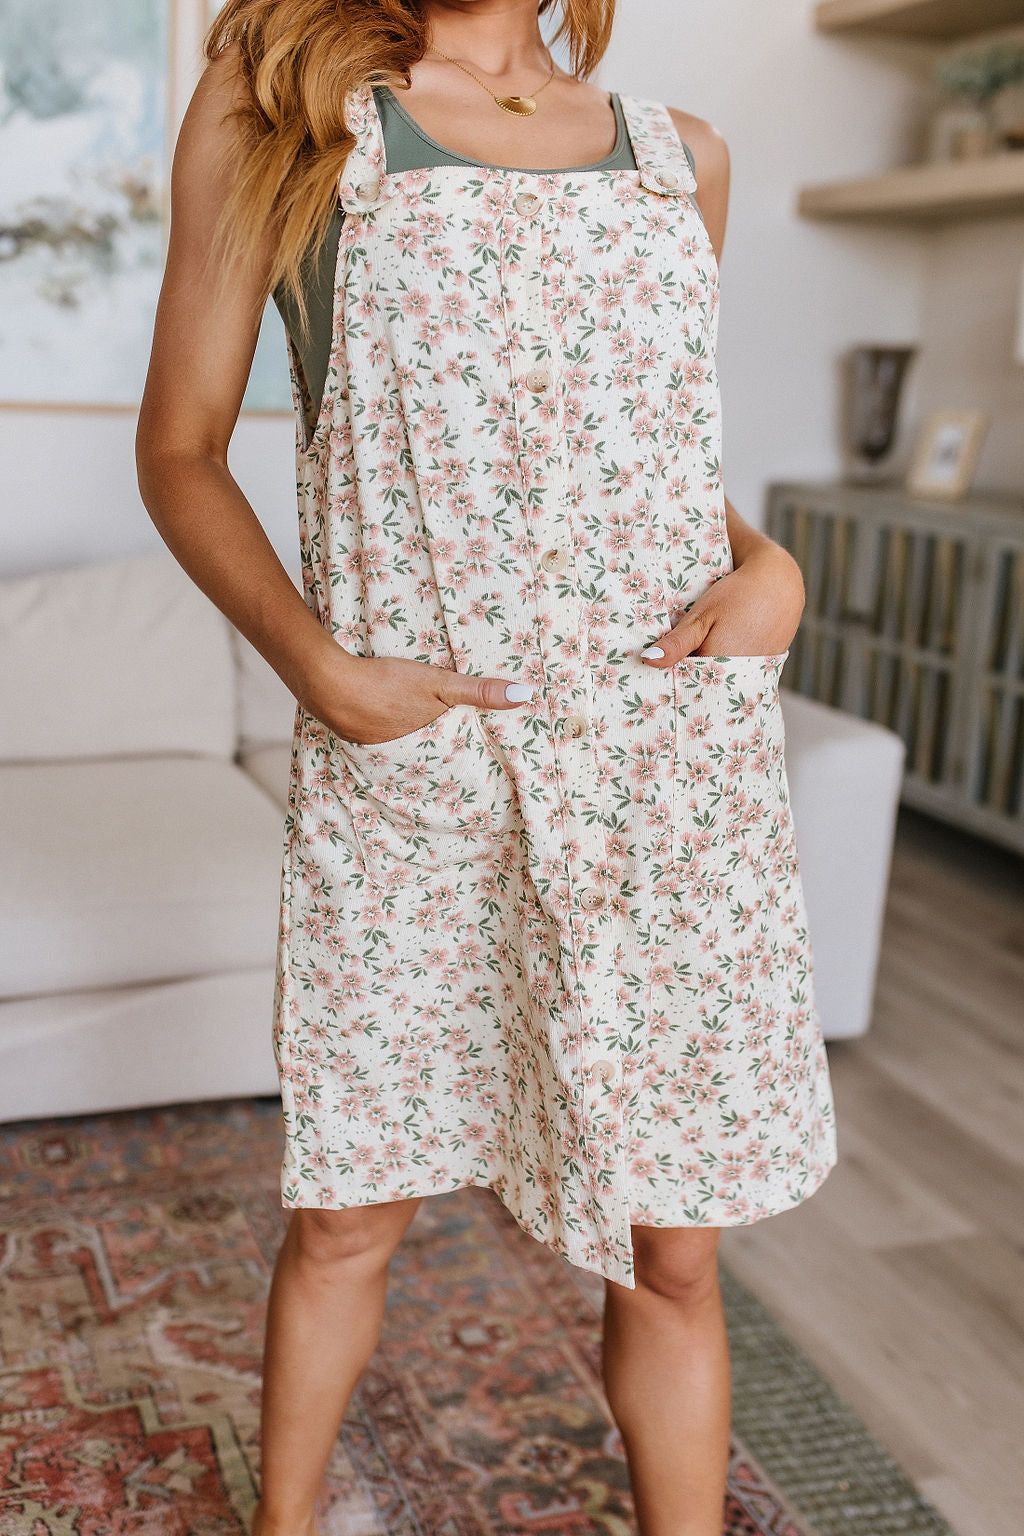 Baby Blossoms Floral Jumper-Dresses-Ave Shops-Market Street Nest, Fashionable Clothing, Shoes and Home Décor Located in Mabank, TX